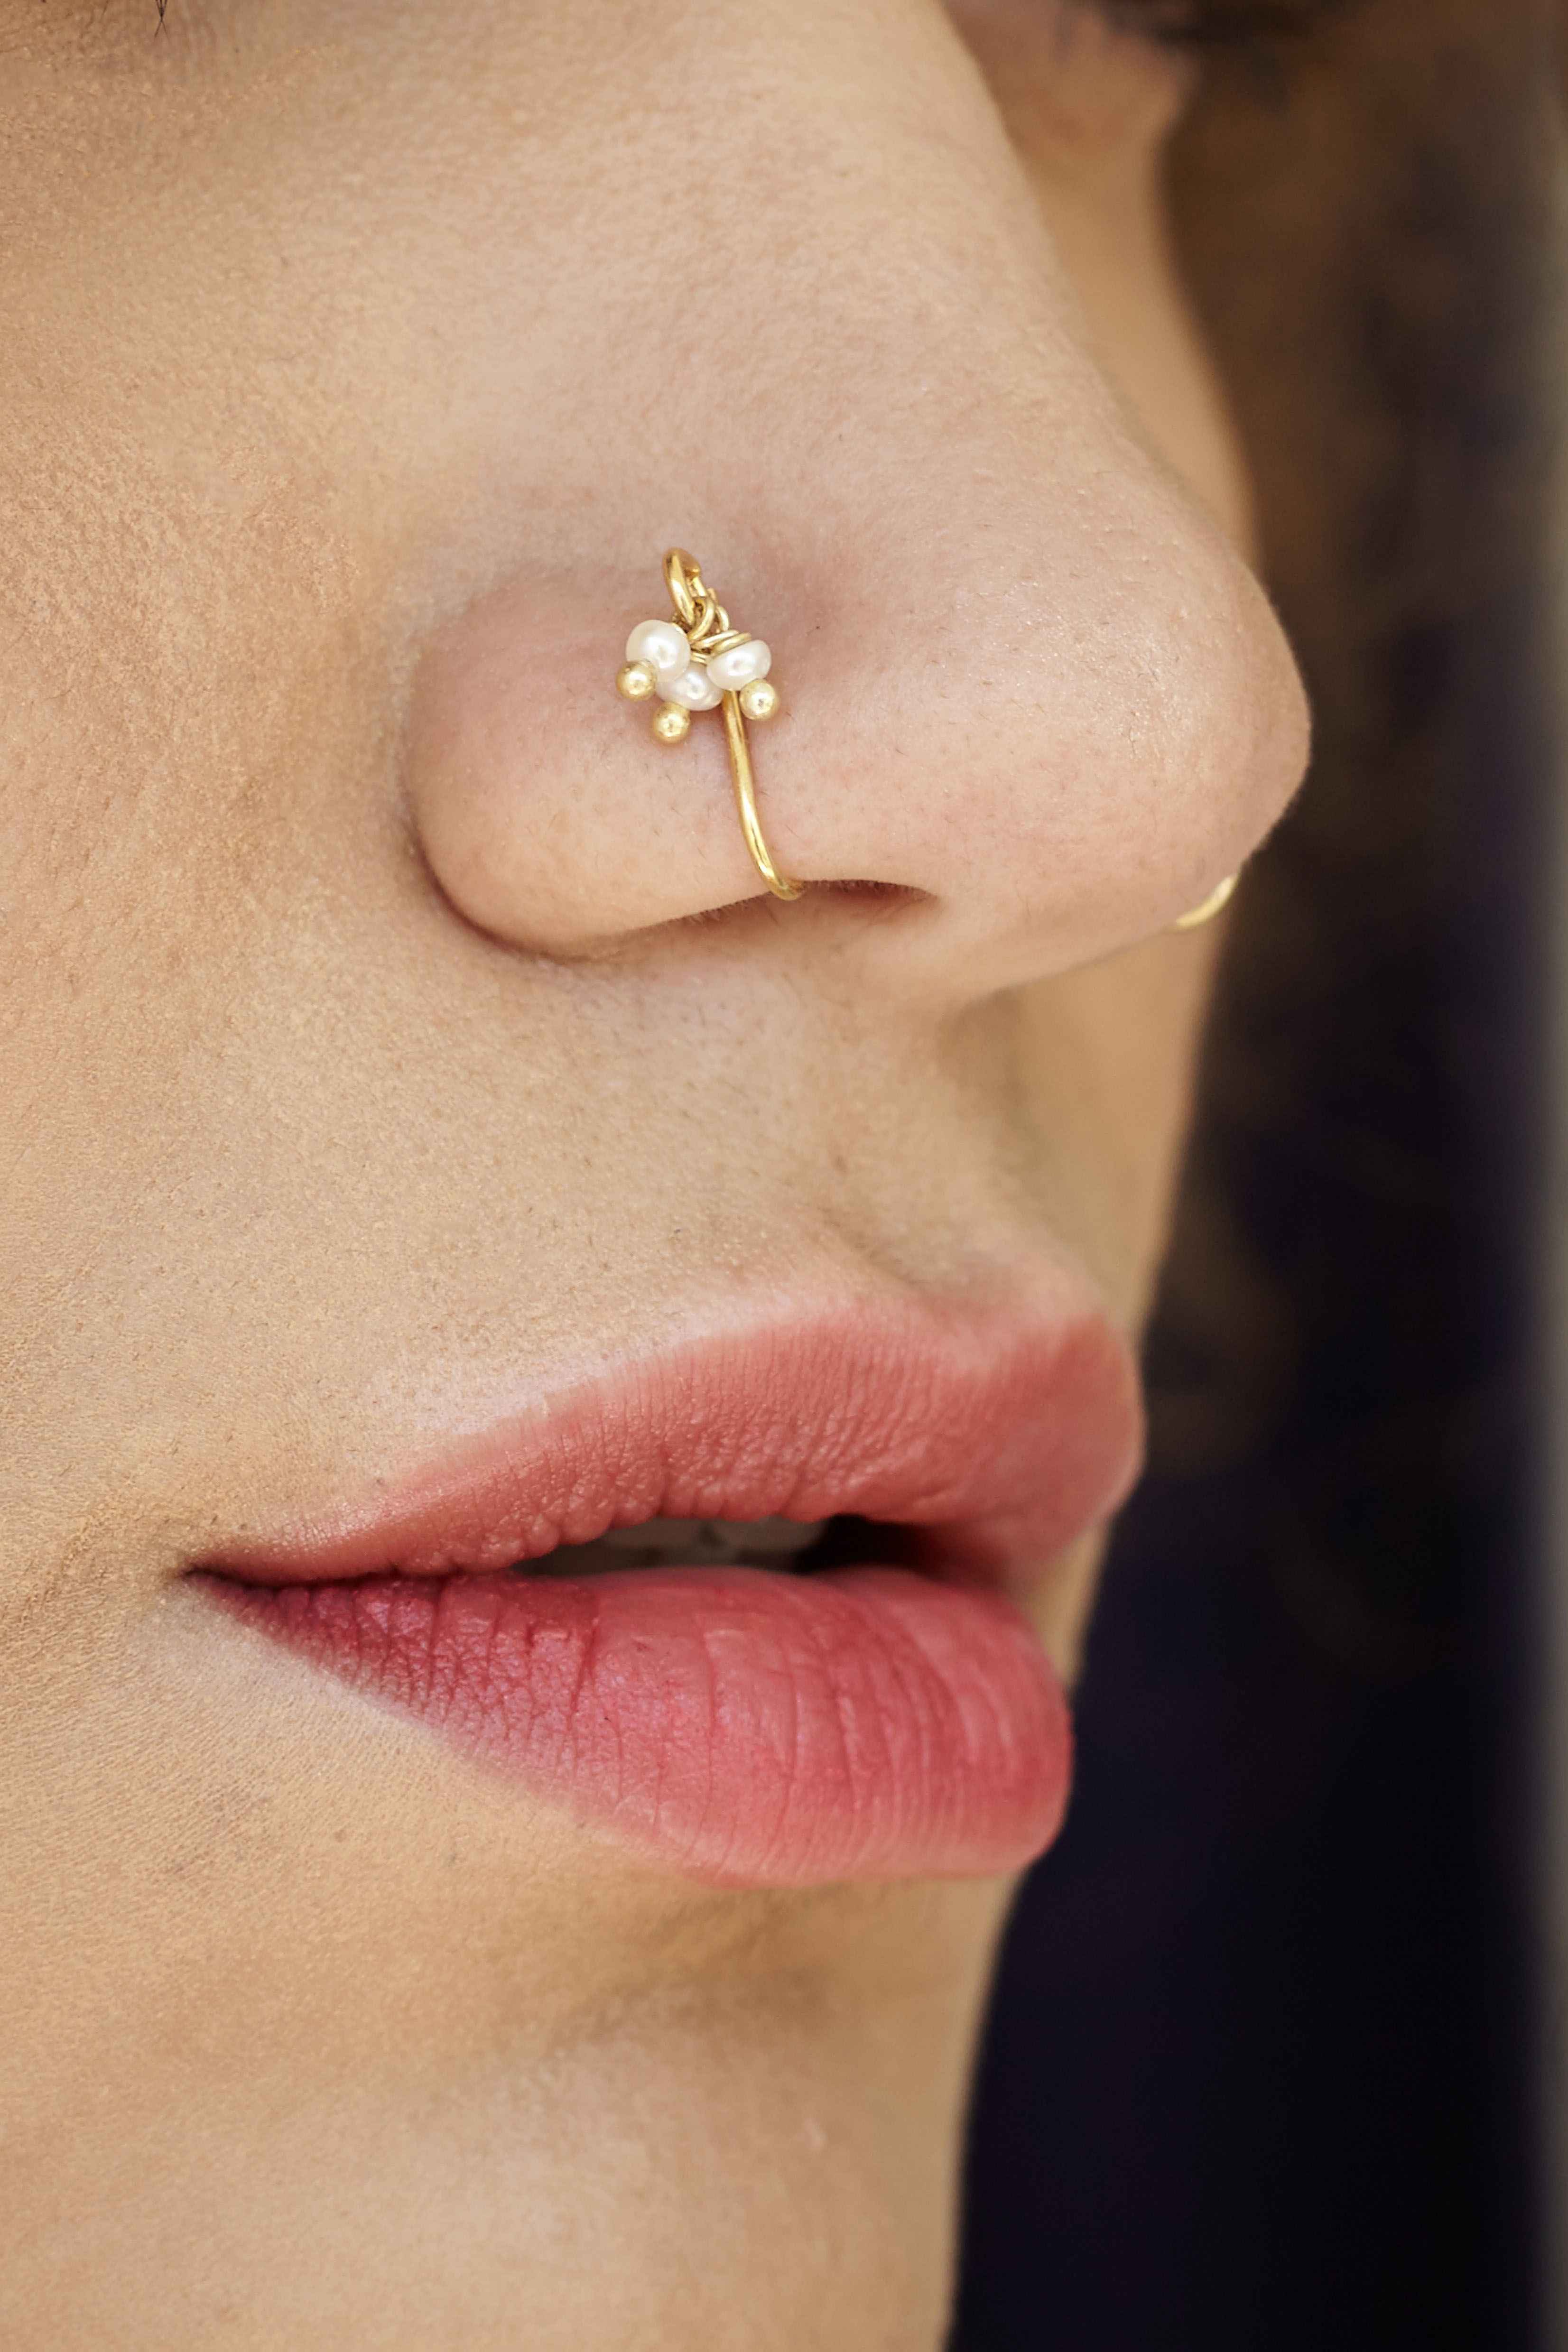 15 Beautiful Nose Pins You Can Try That Don’t Even Require A Piercing